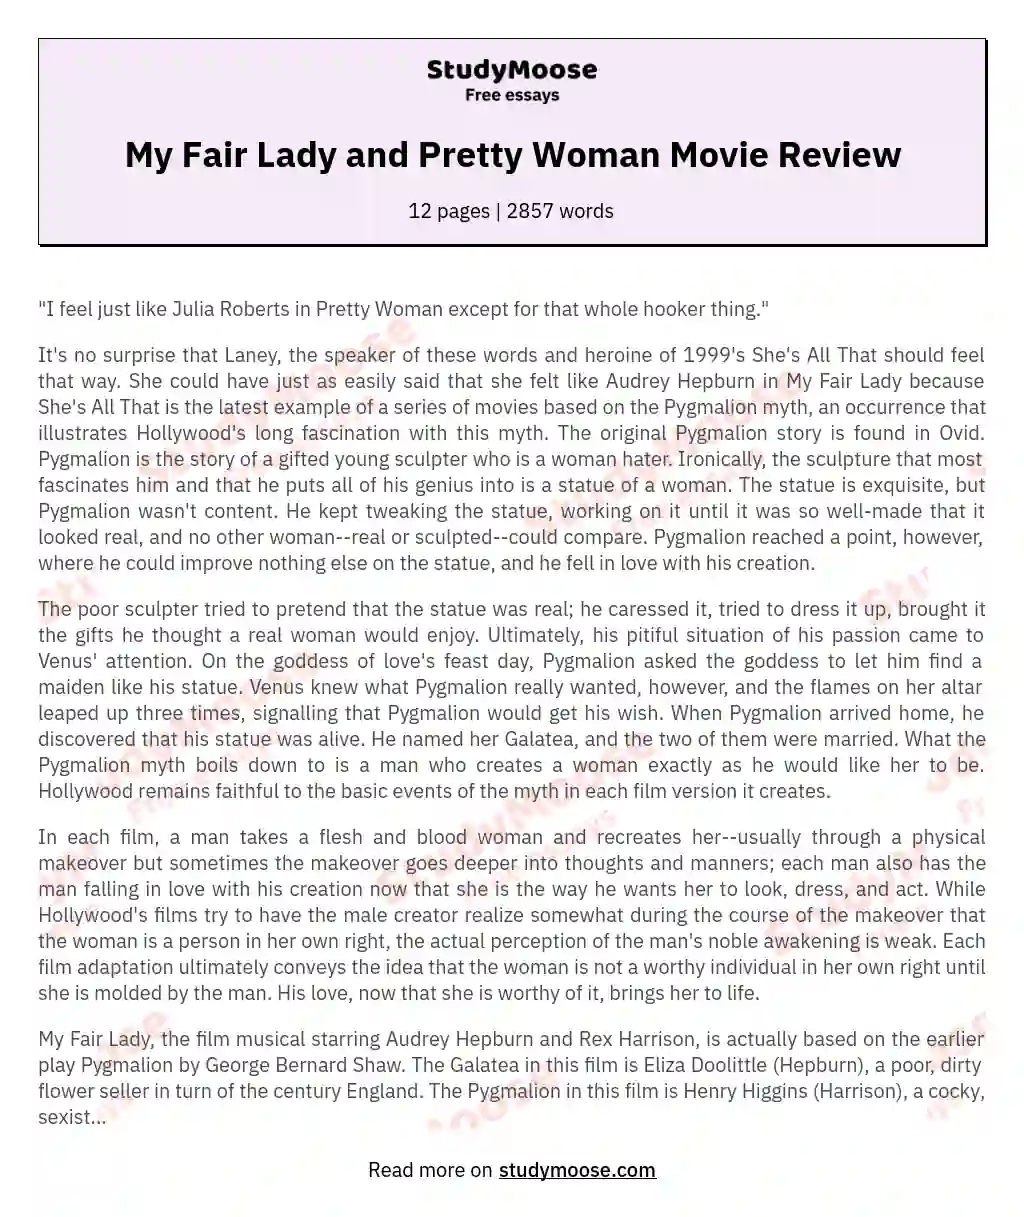 My Fair Lady and Pretty Woman Movie Review essay